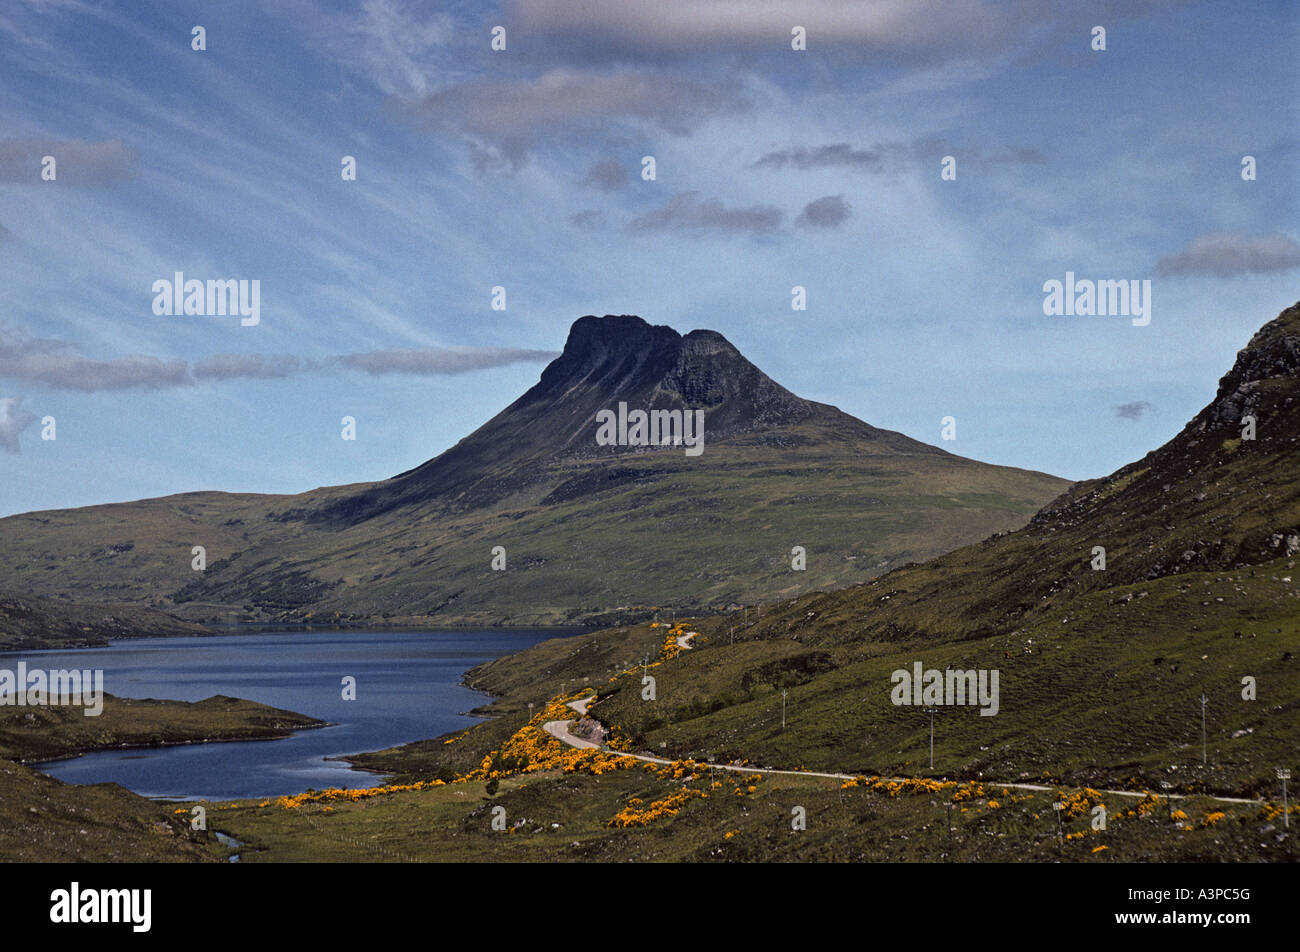 Stac Pollaidh (Peak of the peat moss), from Loch Lurgain, Wester Ross, Scotland, United Kingdom, Europe. Stock Photo